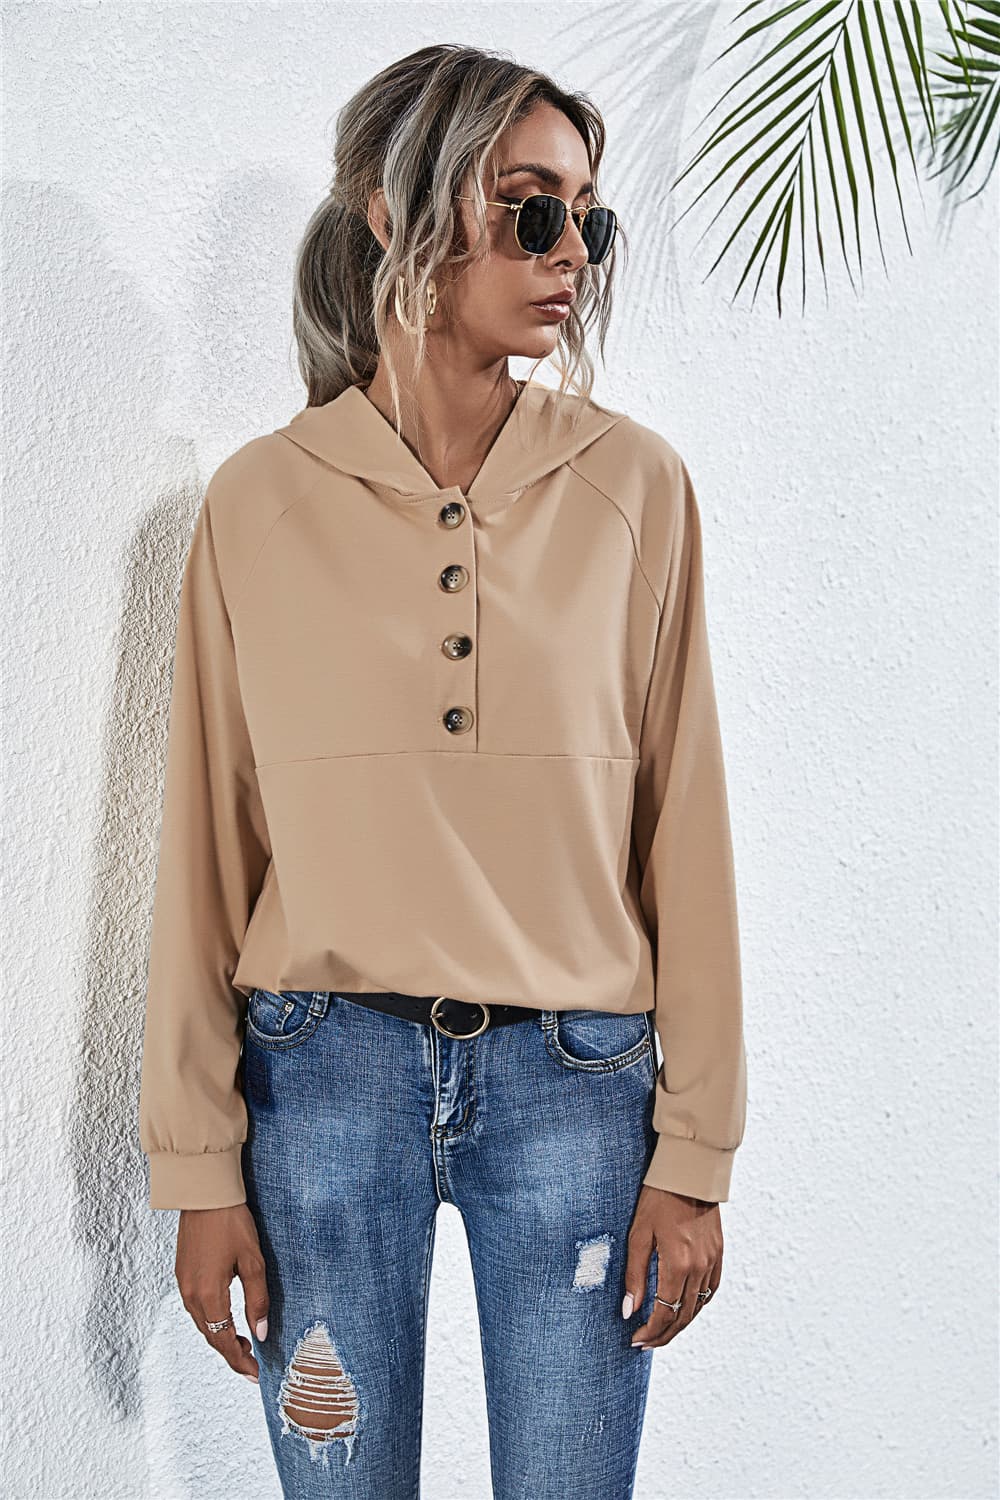 Buttoned Raglan Sleeve Hooded Blouse - Guy Christopher